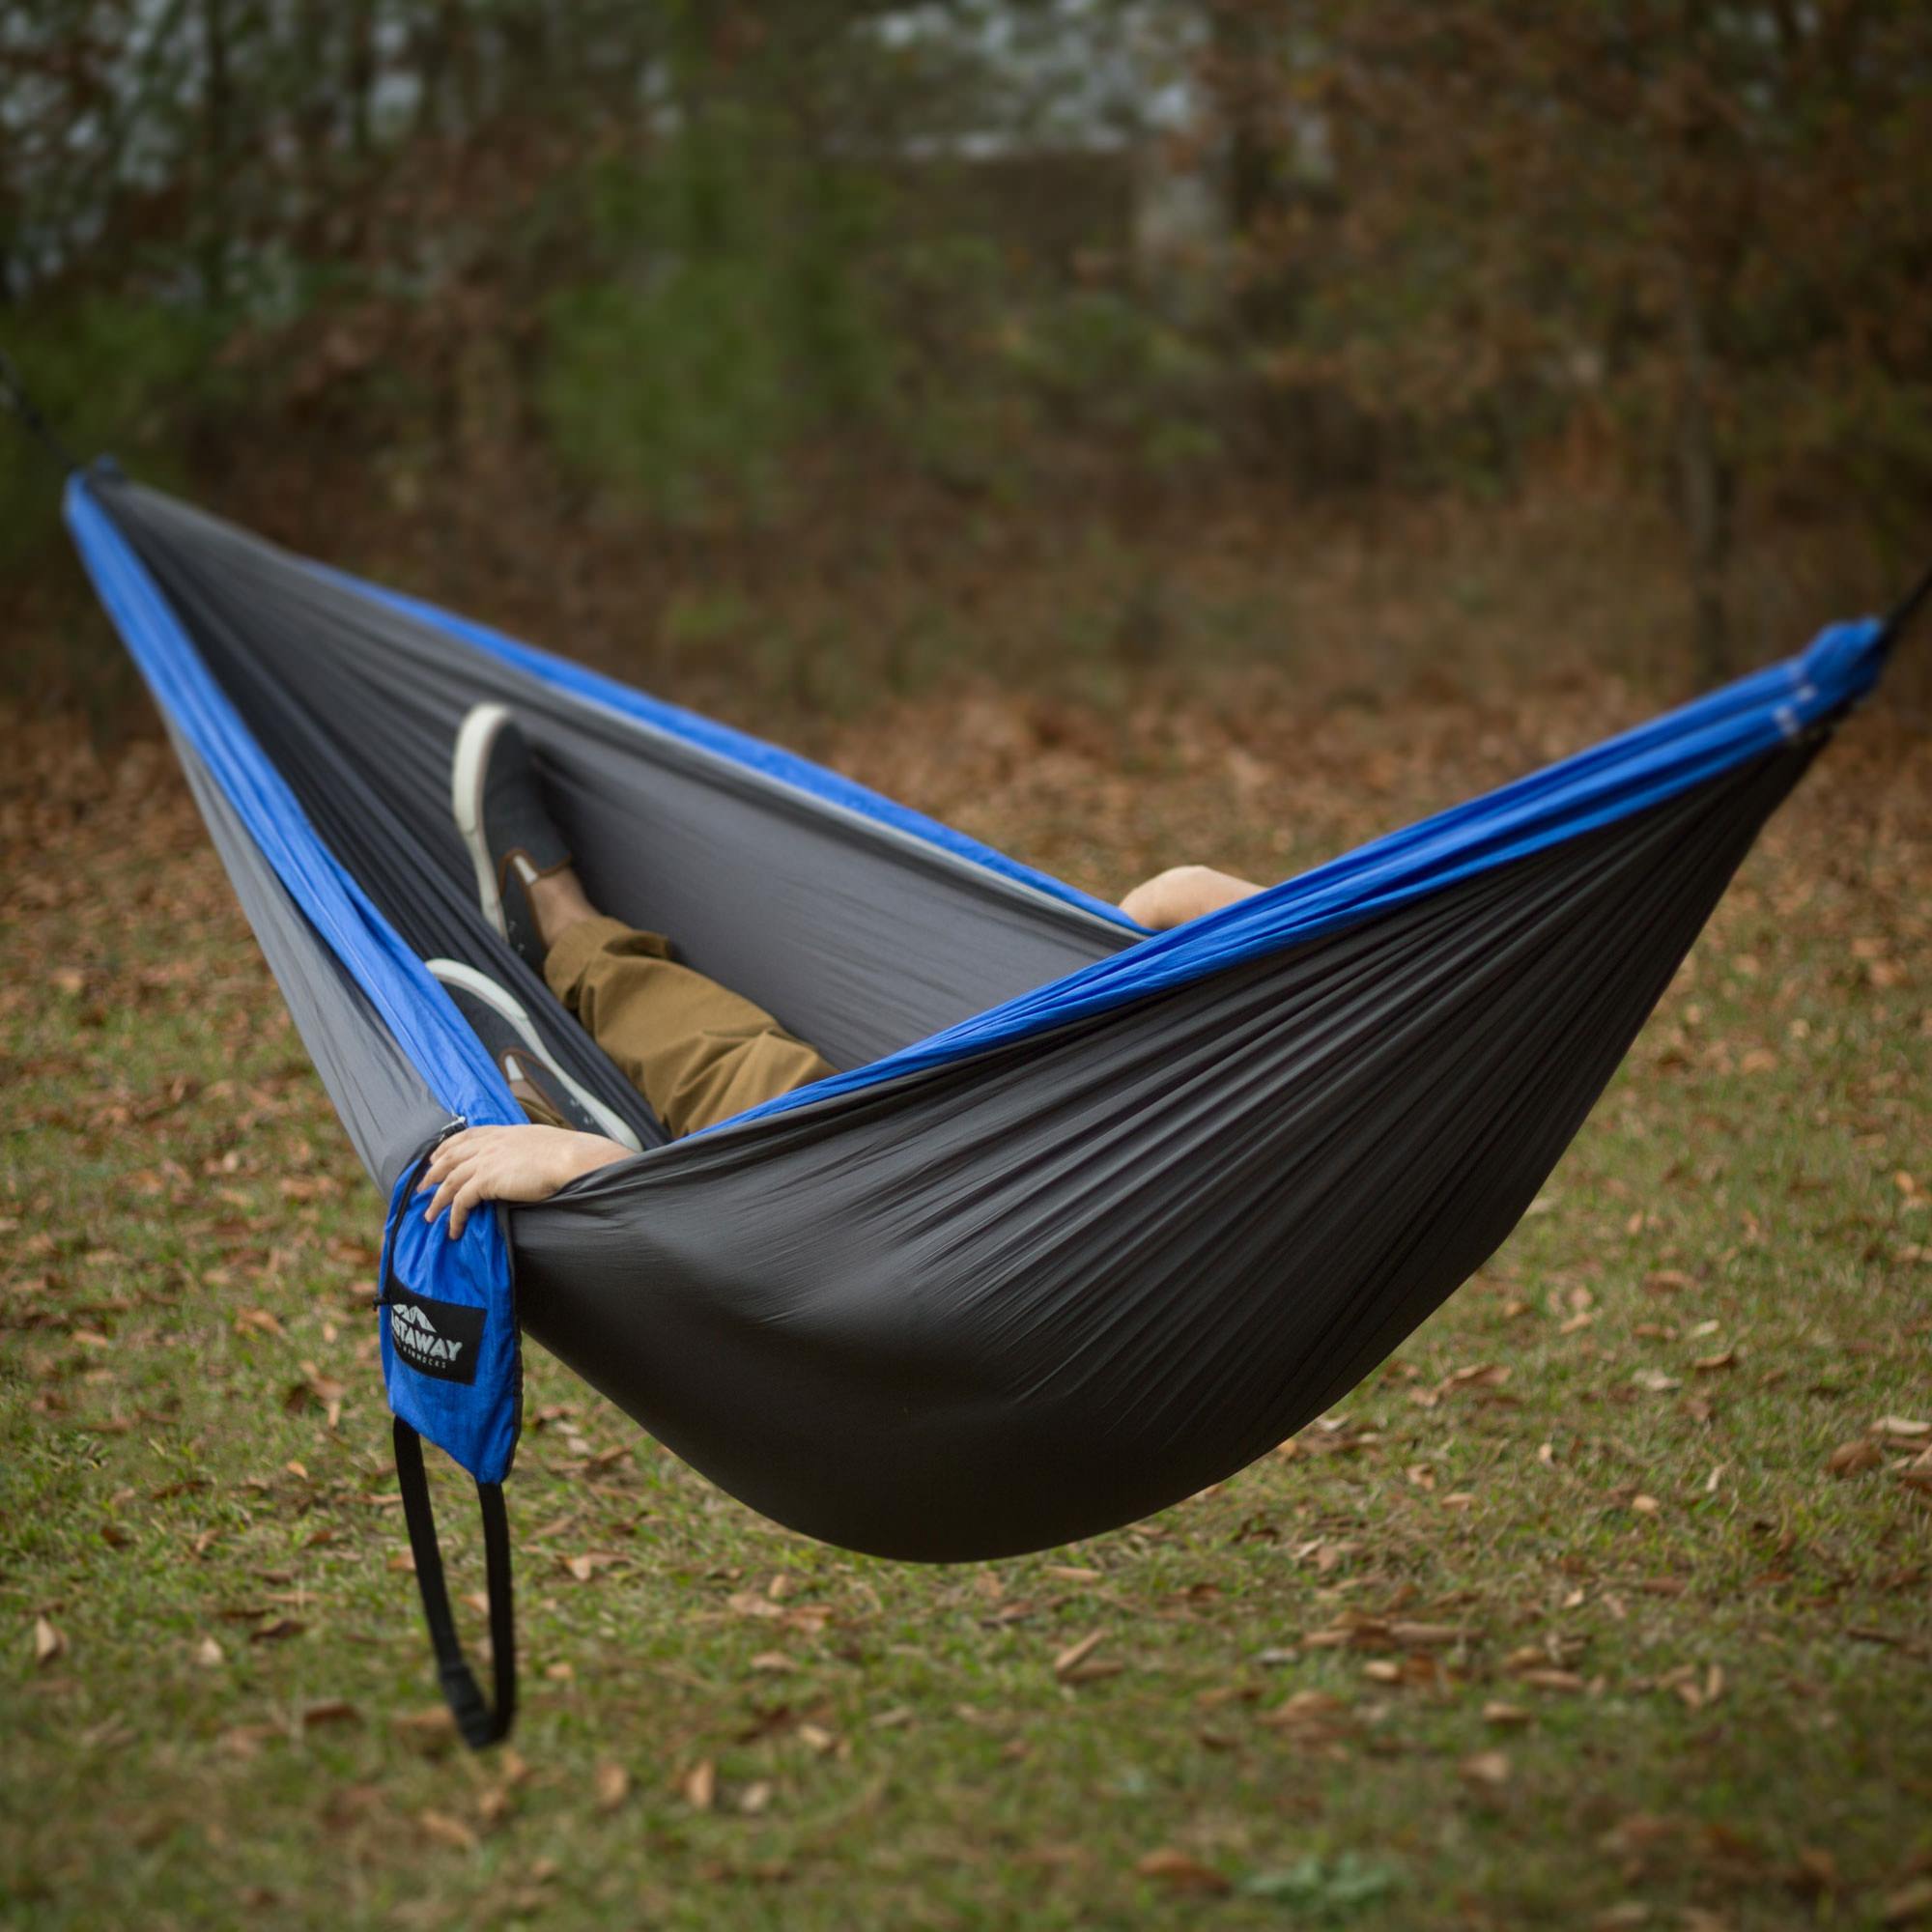 Top 104+ Pictures Pictures Of A Hammock Excellent